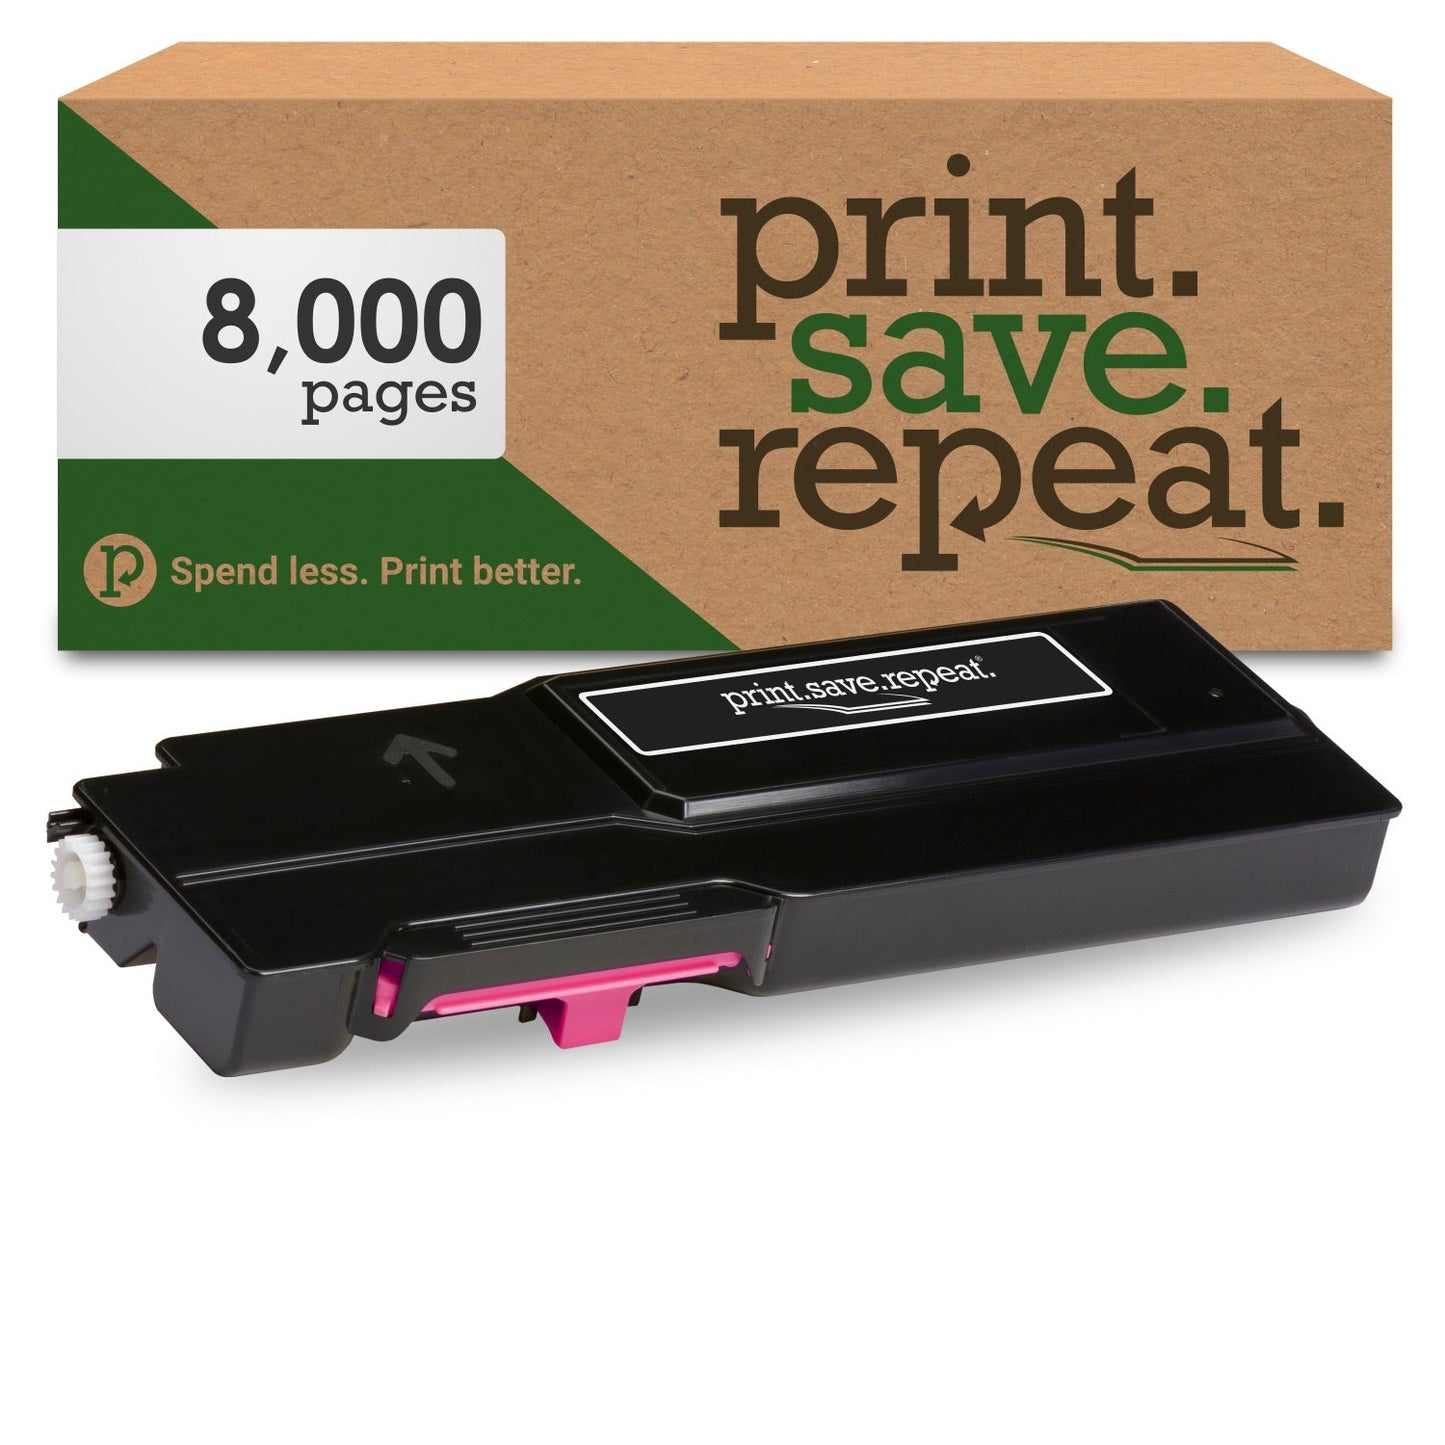 Print.Save.Repeat. Xerox 106R03527 Magenta Extra High Yield Remanufactured Toner Cartridge for VersaLink C400, C405 [8,000 Pages]